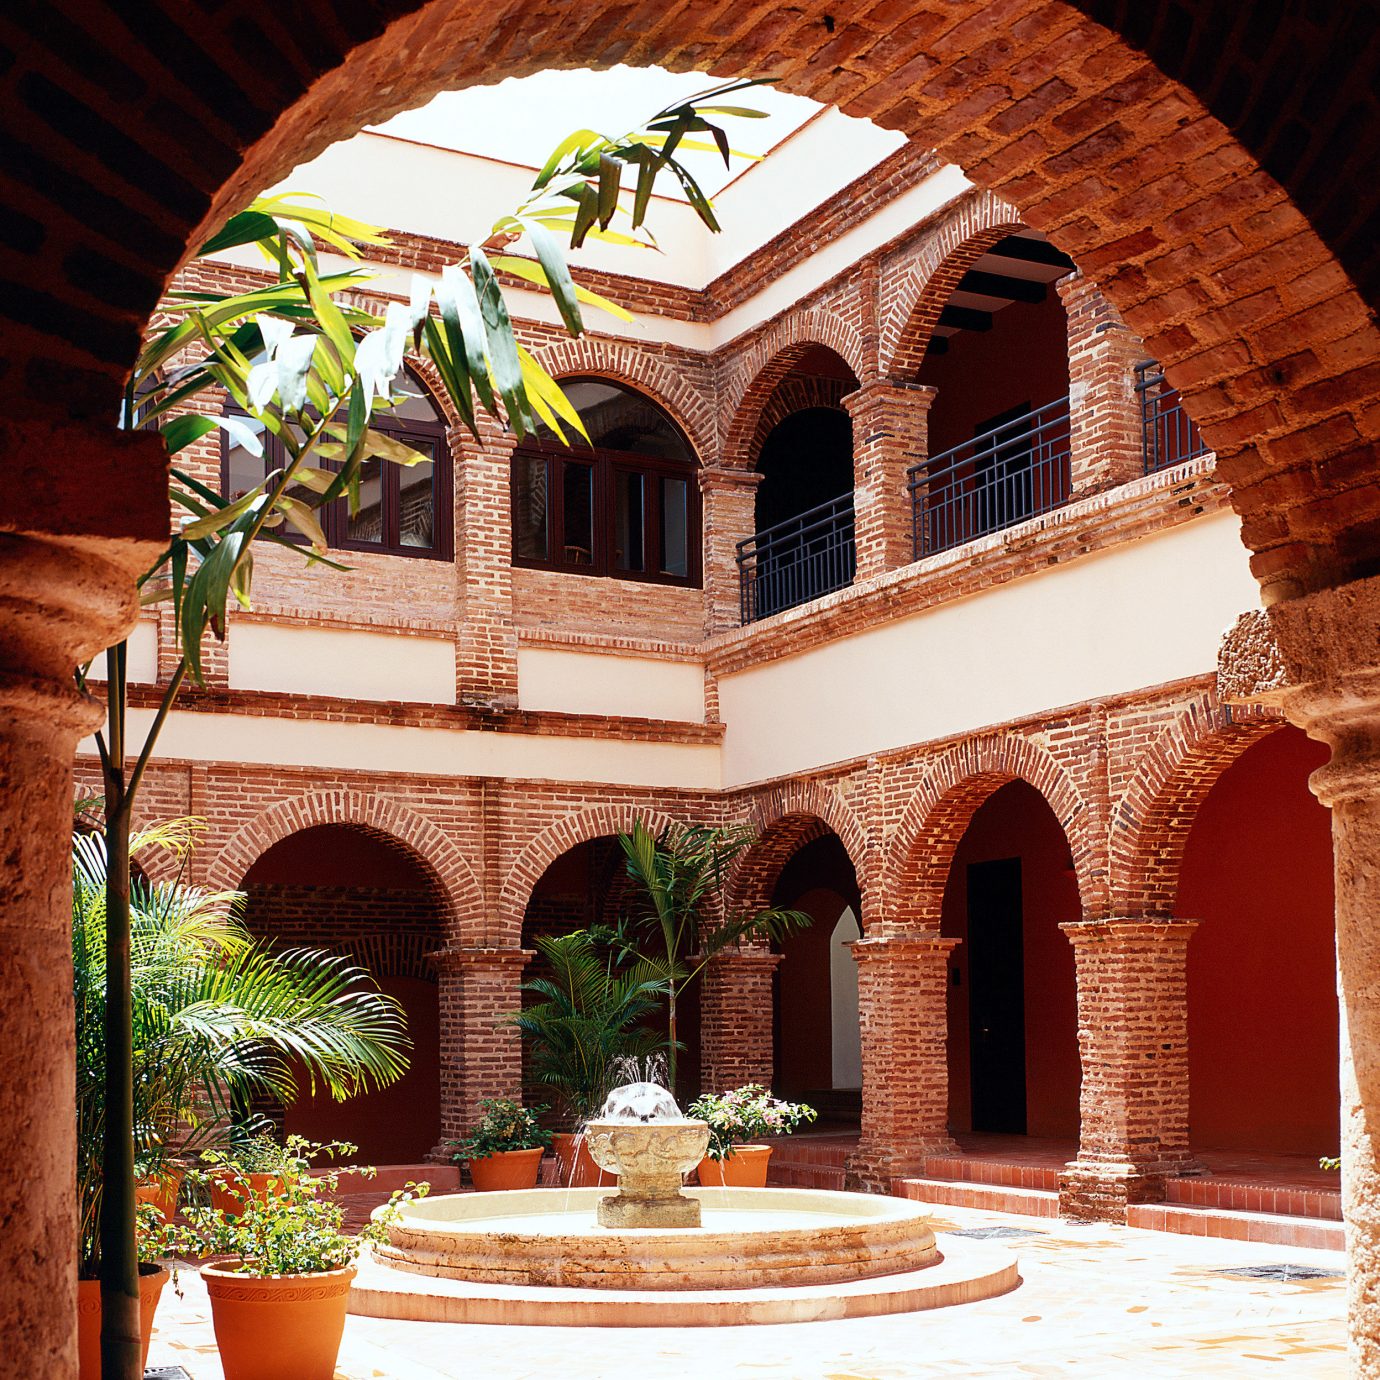 Classic Courtyard Grounds building arch Architecture hacienda stone brick home mansion palace ancient history court colonnade